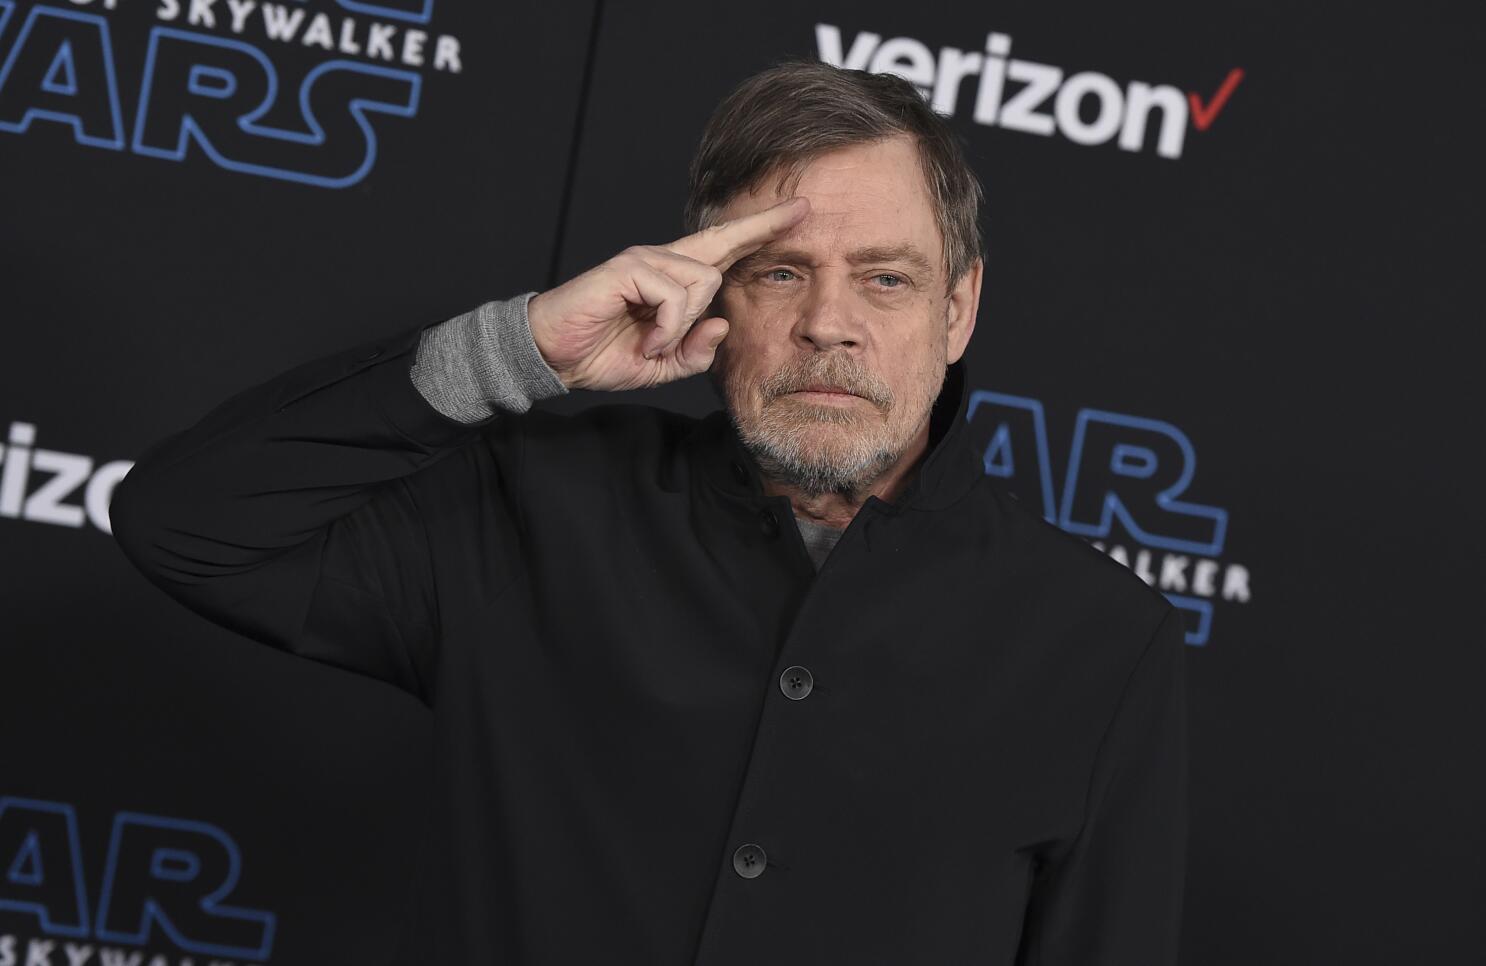 New York Post on Twitter: Mark Hamill defends controversial 'Star